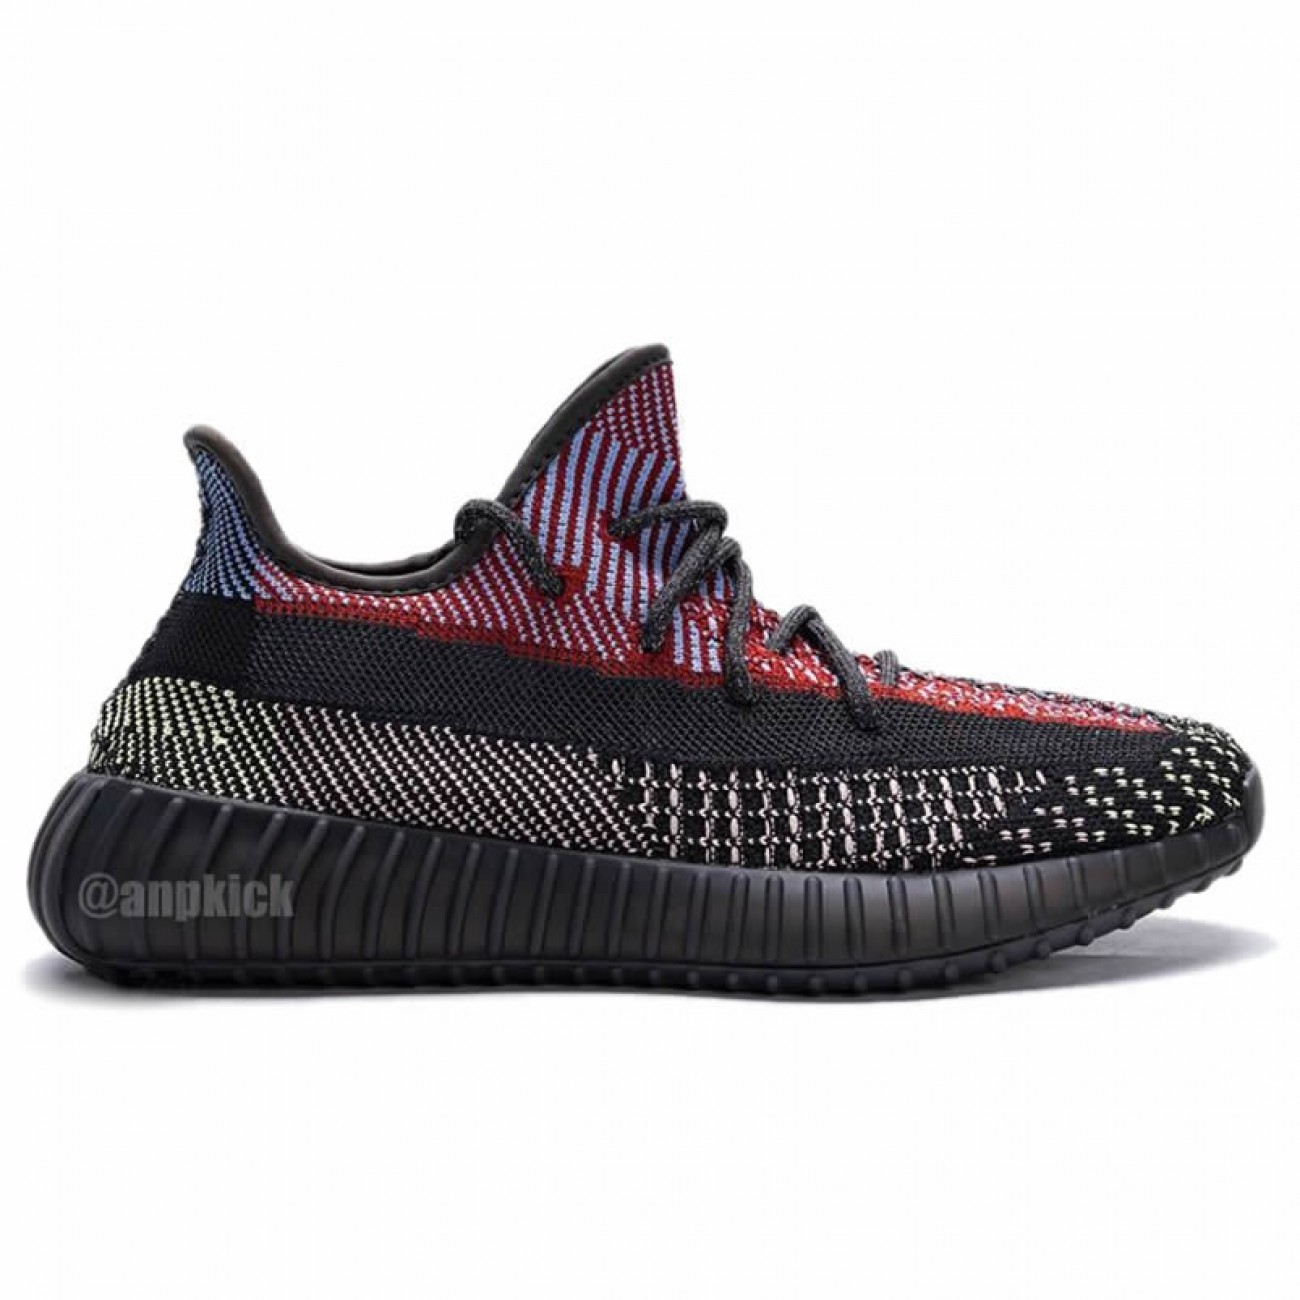 adidas Yeezy Boost 350 V2 "Yecheil" Reflective FX4145 Non-Reflective FW5190 Release Date For Sale